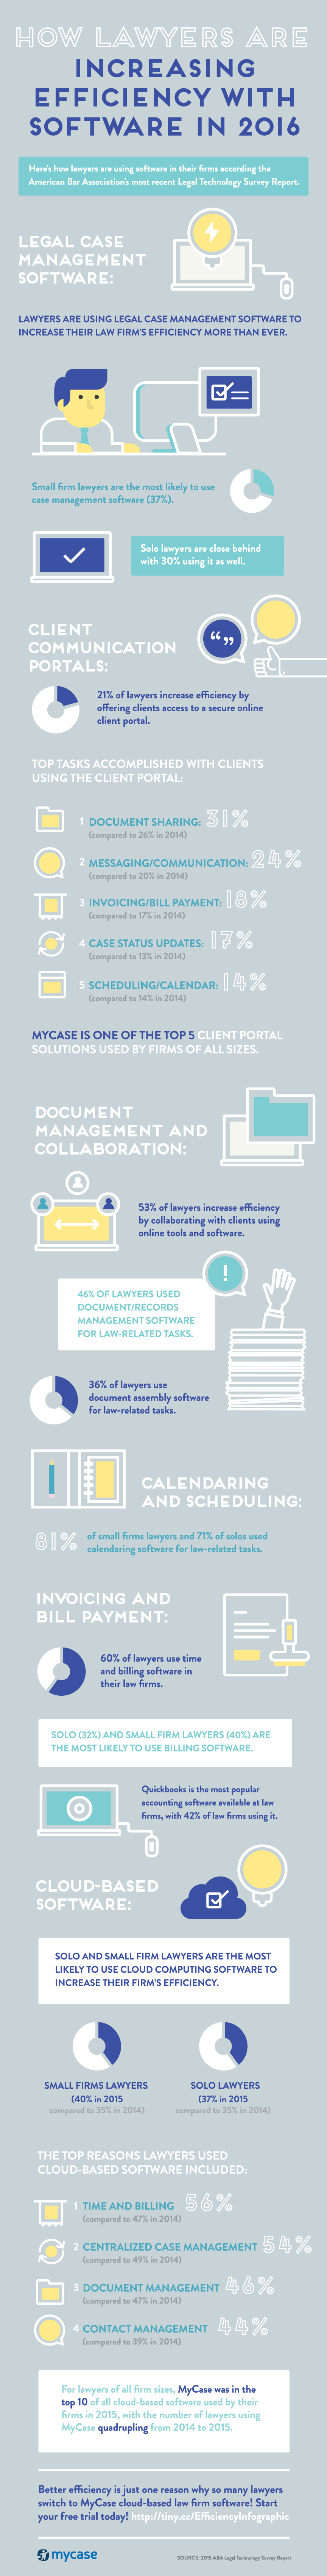 lawyers-efficiency-with-software-6